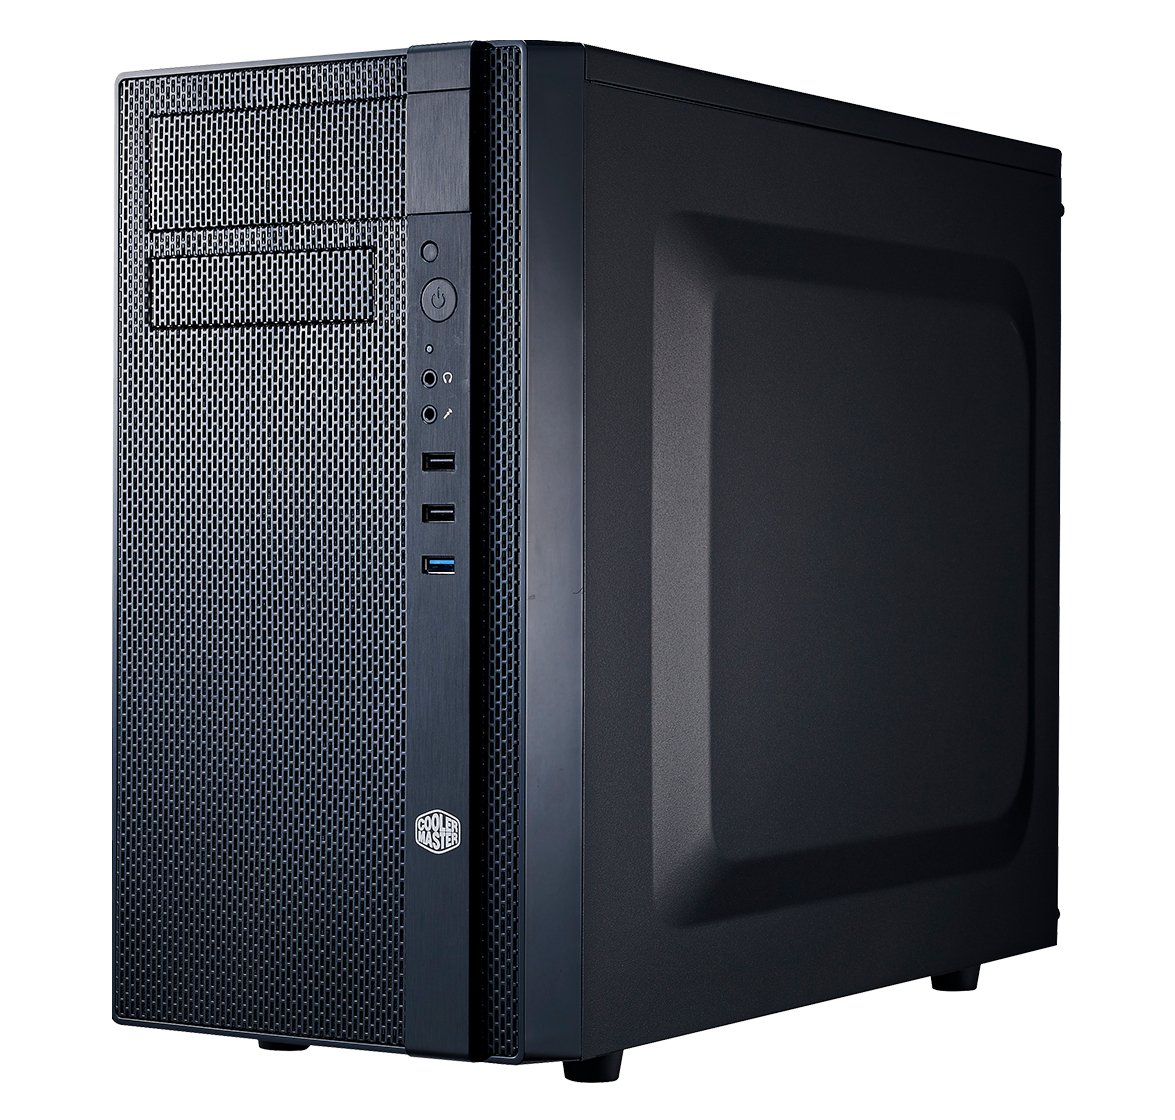 Cooler Master N200 - Mini Tower Computer Case with Fully Meshed Front Panel and mATX/Mini-ITX Support - Geek Tech